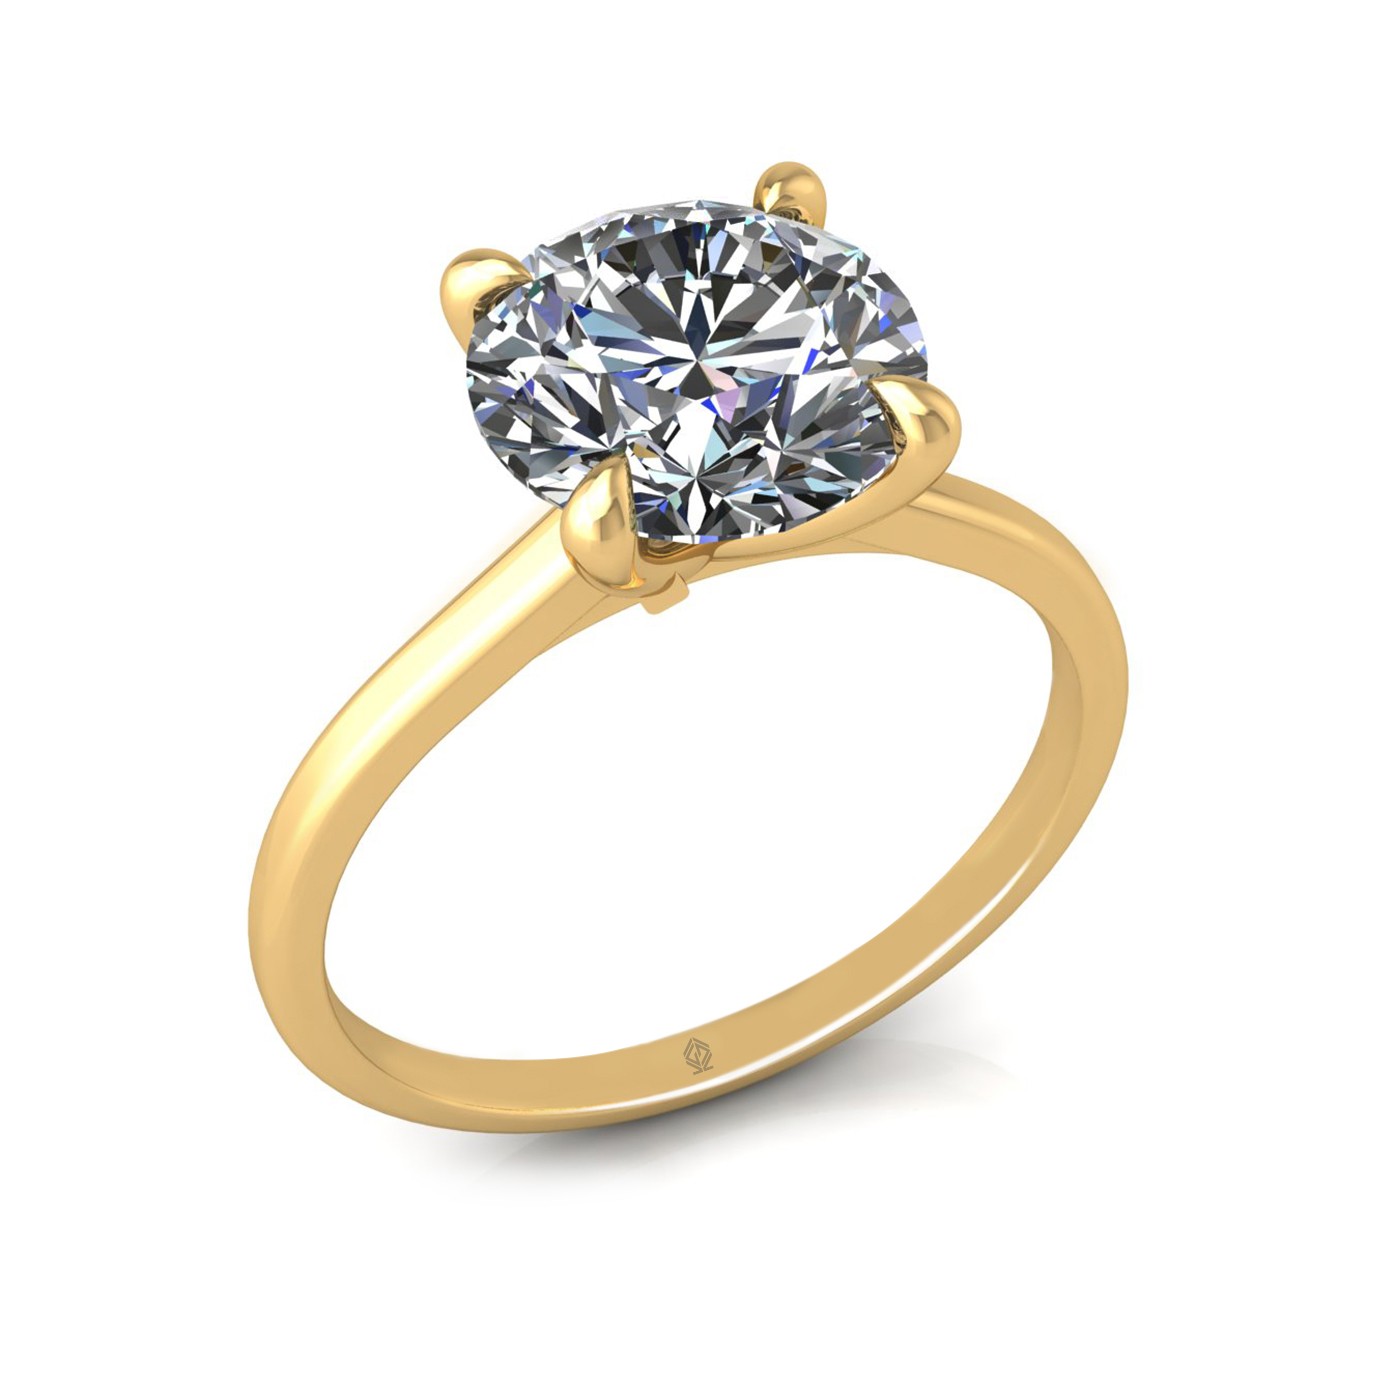 18k yellow gold 2,50 ct 4 prongs solitaire round cut diamond engagement ring with whisper thin band